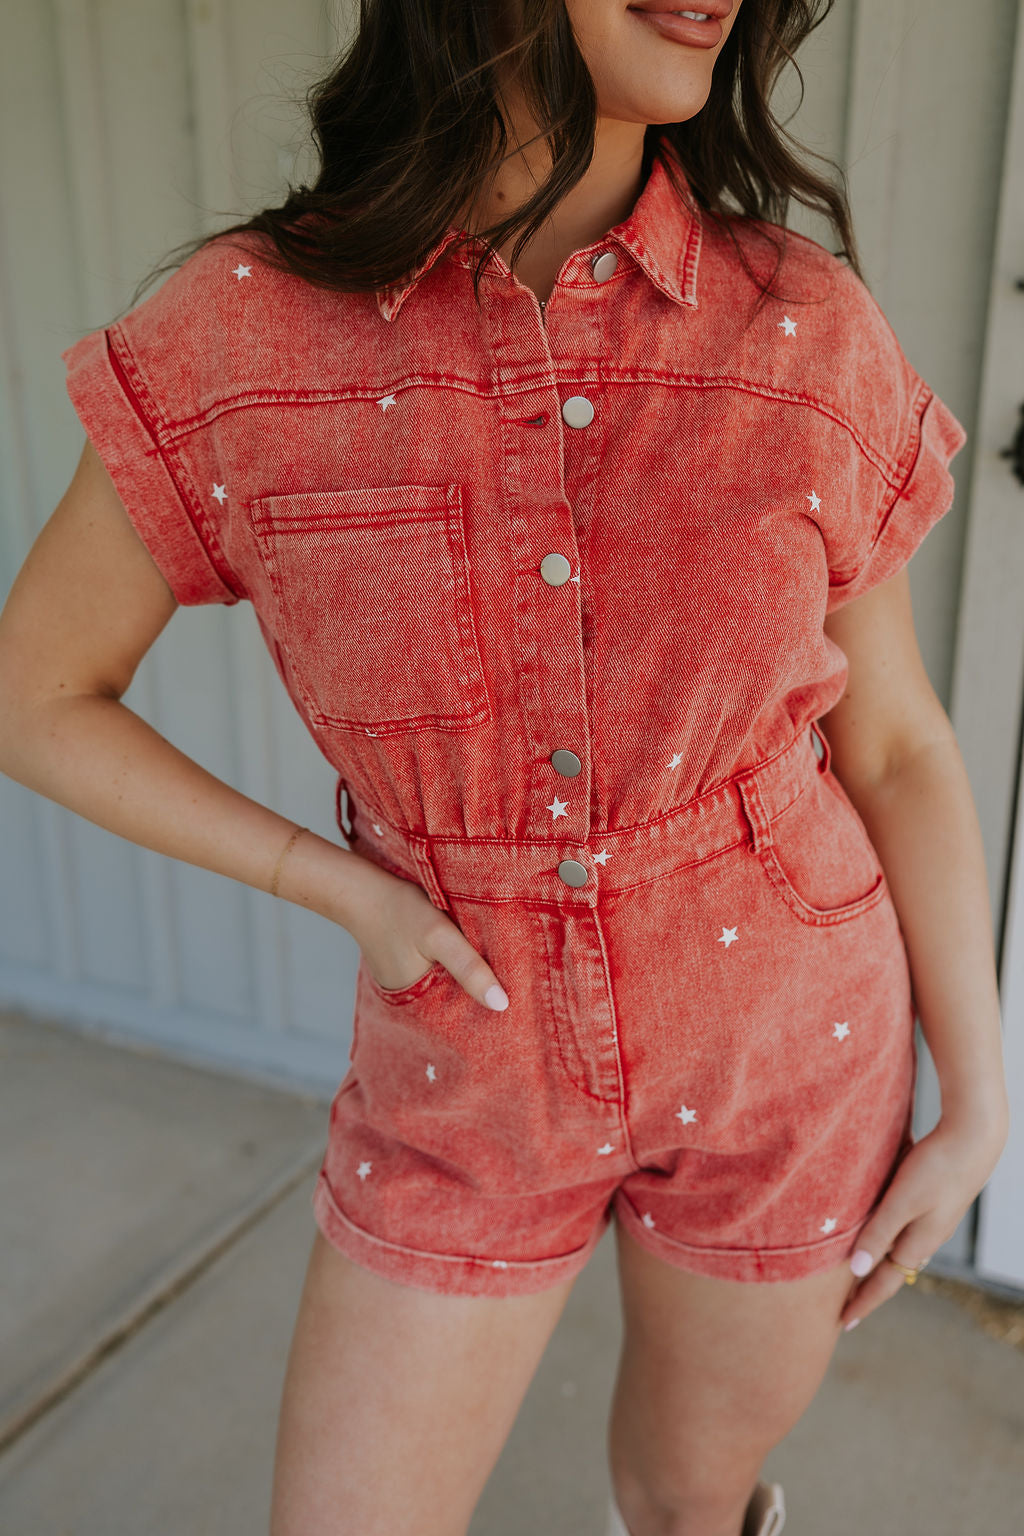 Close-up front view of female model wearing the Krystal Washed Red Denim Star Romper that has red denim fabric with white stars, a snap up front, collar, belt loops, pocket, and short sleeves.